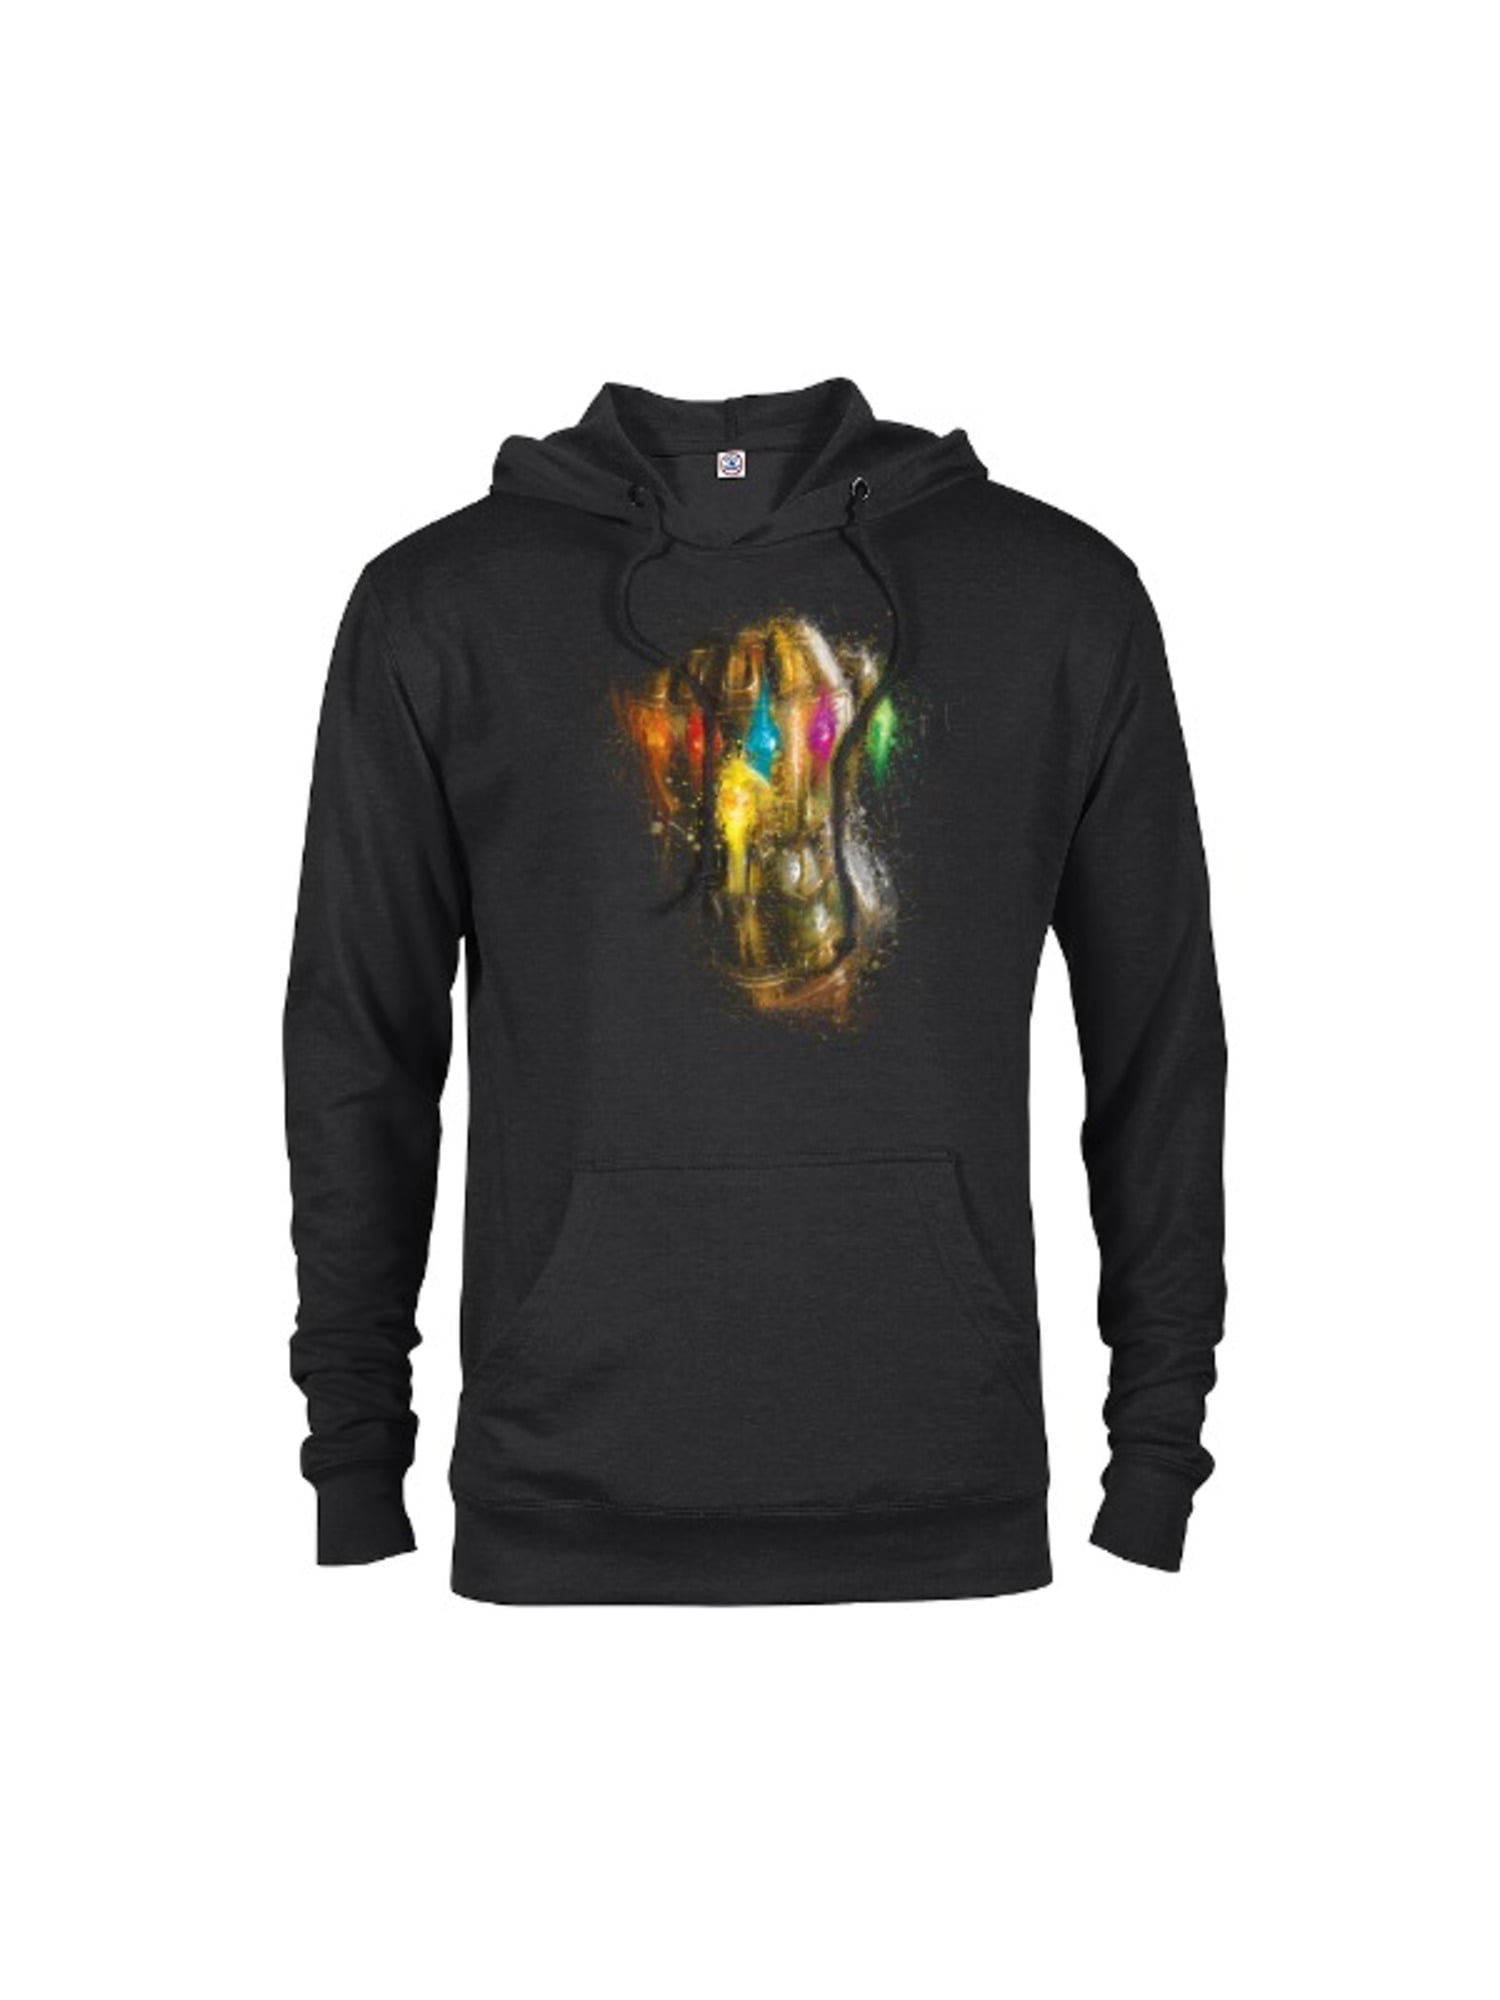 Avengers Endgame Jumper Marvel Comics Superheroes Thanos Avengers All Heroes Party Wear Gift Adult and Kids Sizes Jumper Top